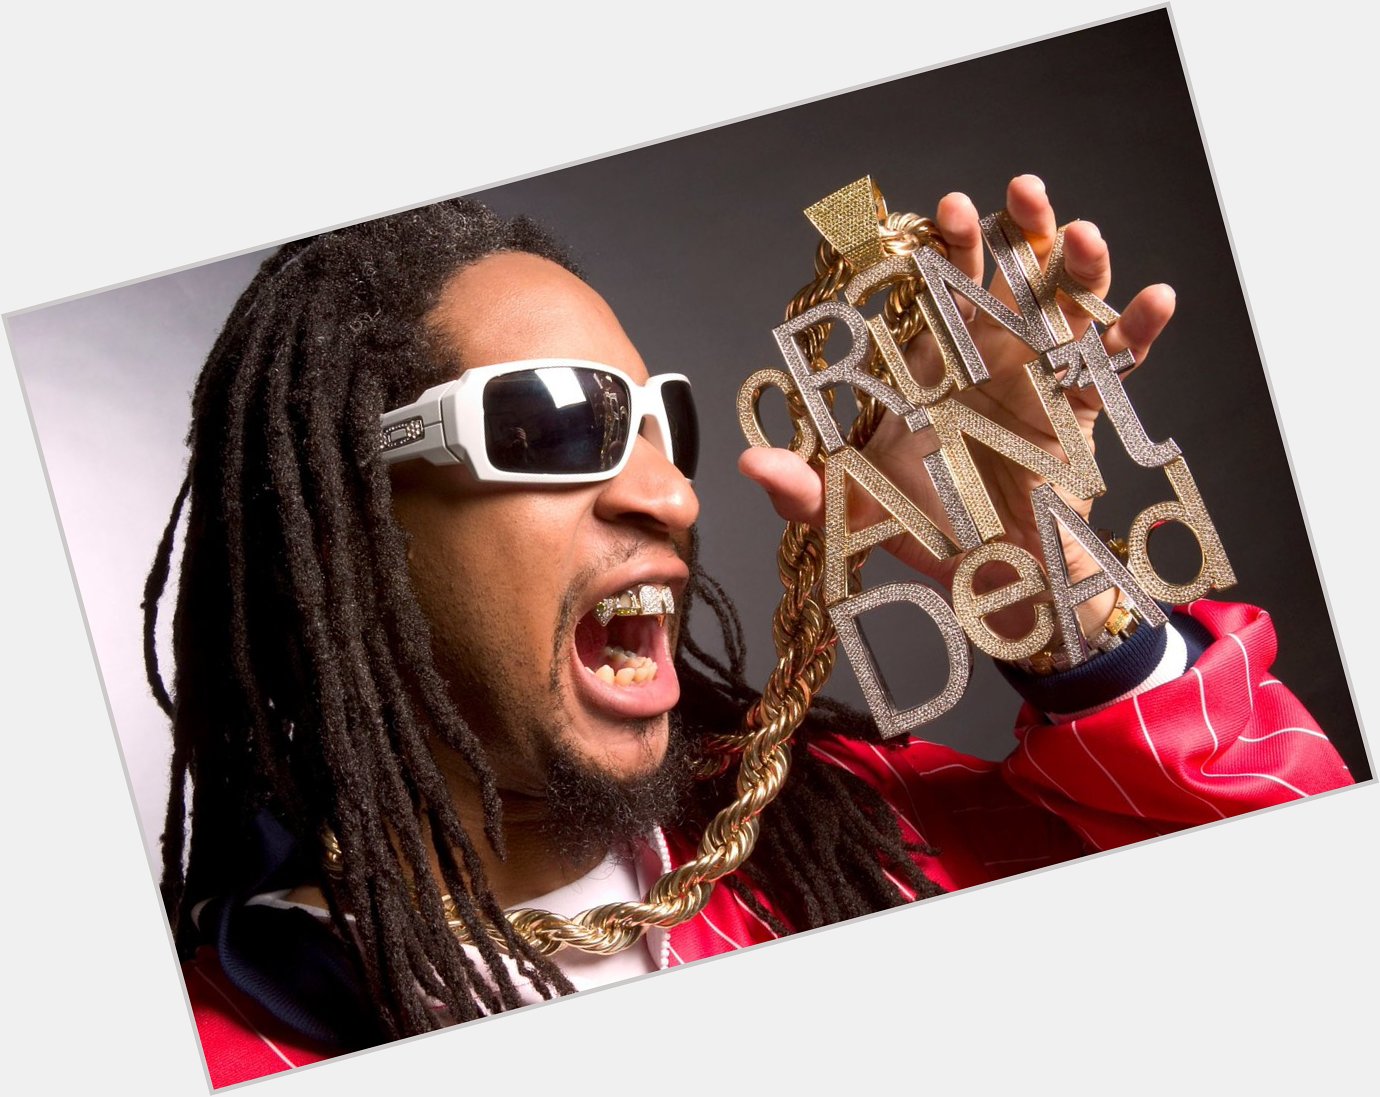 Happy 50th Birthday to     Name your fav track(s) by Lil Jon!        